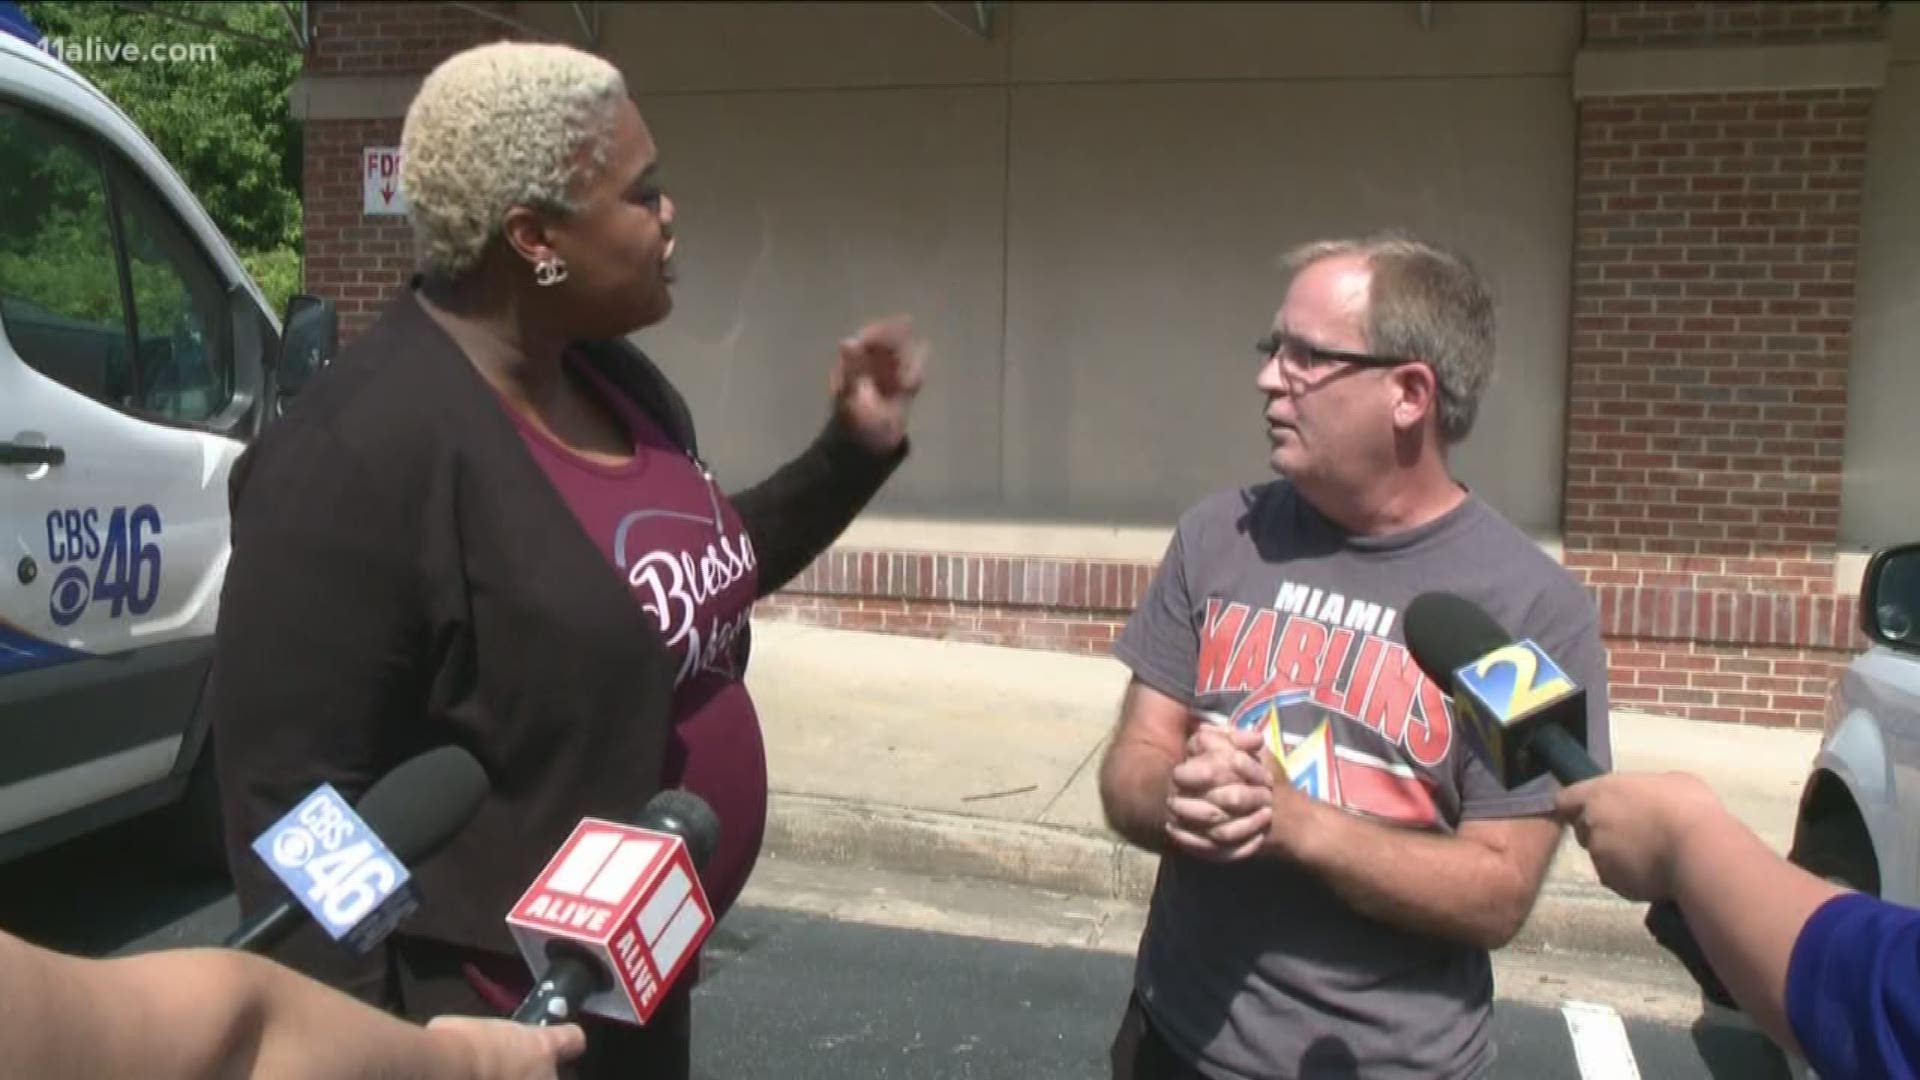 Sparkes said he did use profanity calling her a b**** but never told her to go back where she came from. Past social media posts also show he appears to be a staunch opponent of similar comments made by President Donald Trump - something he said while speaking with 11Alive.